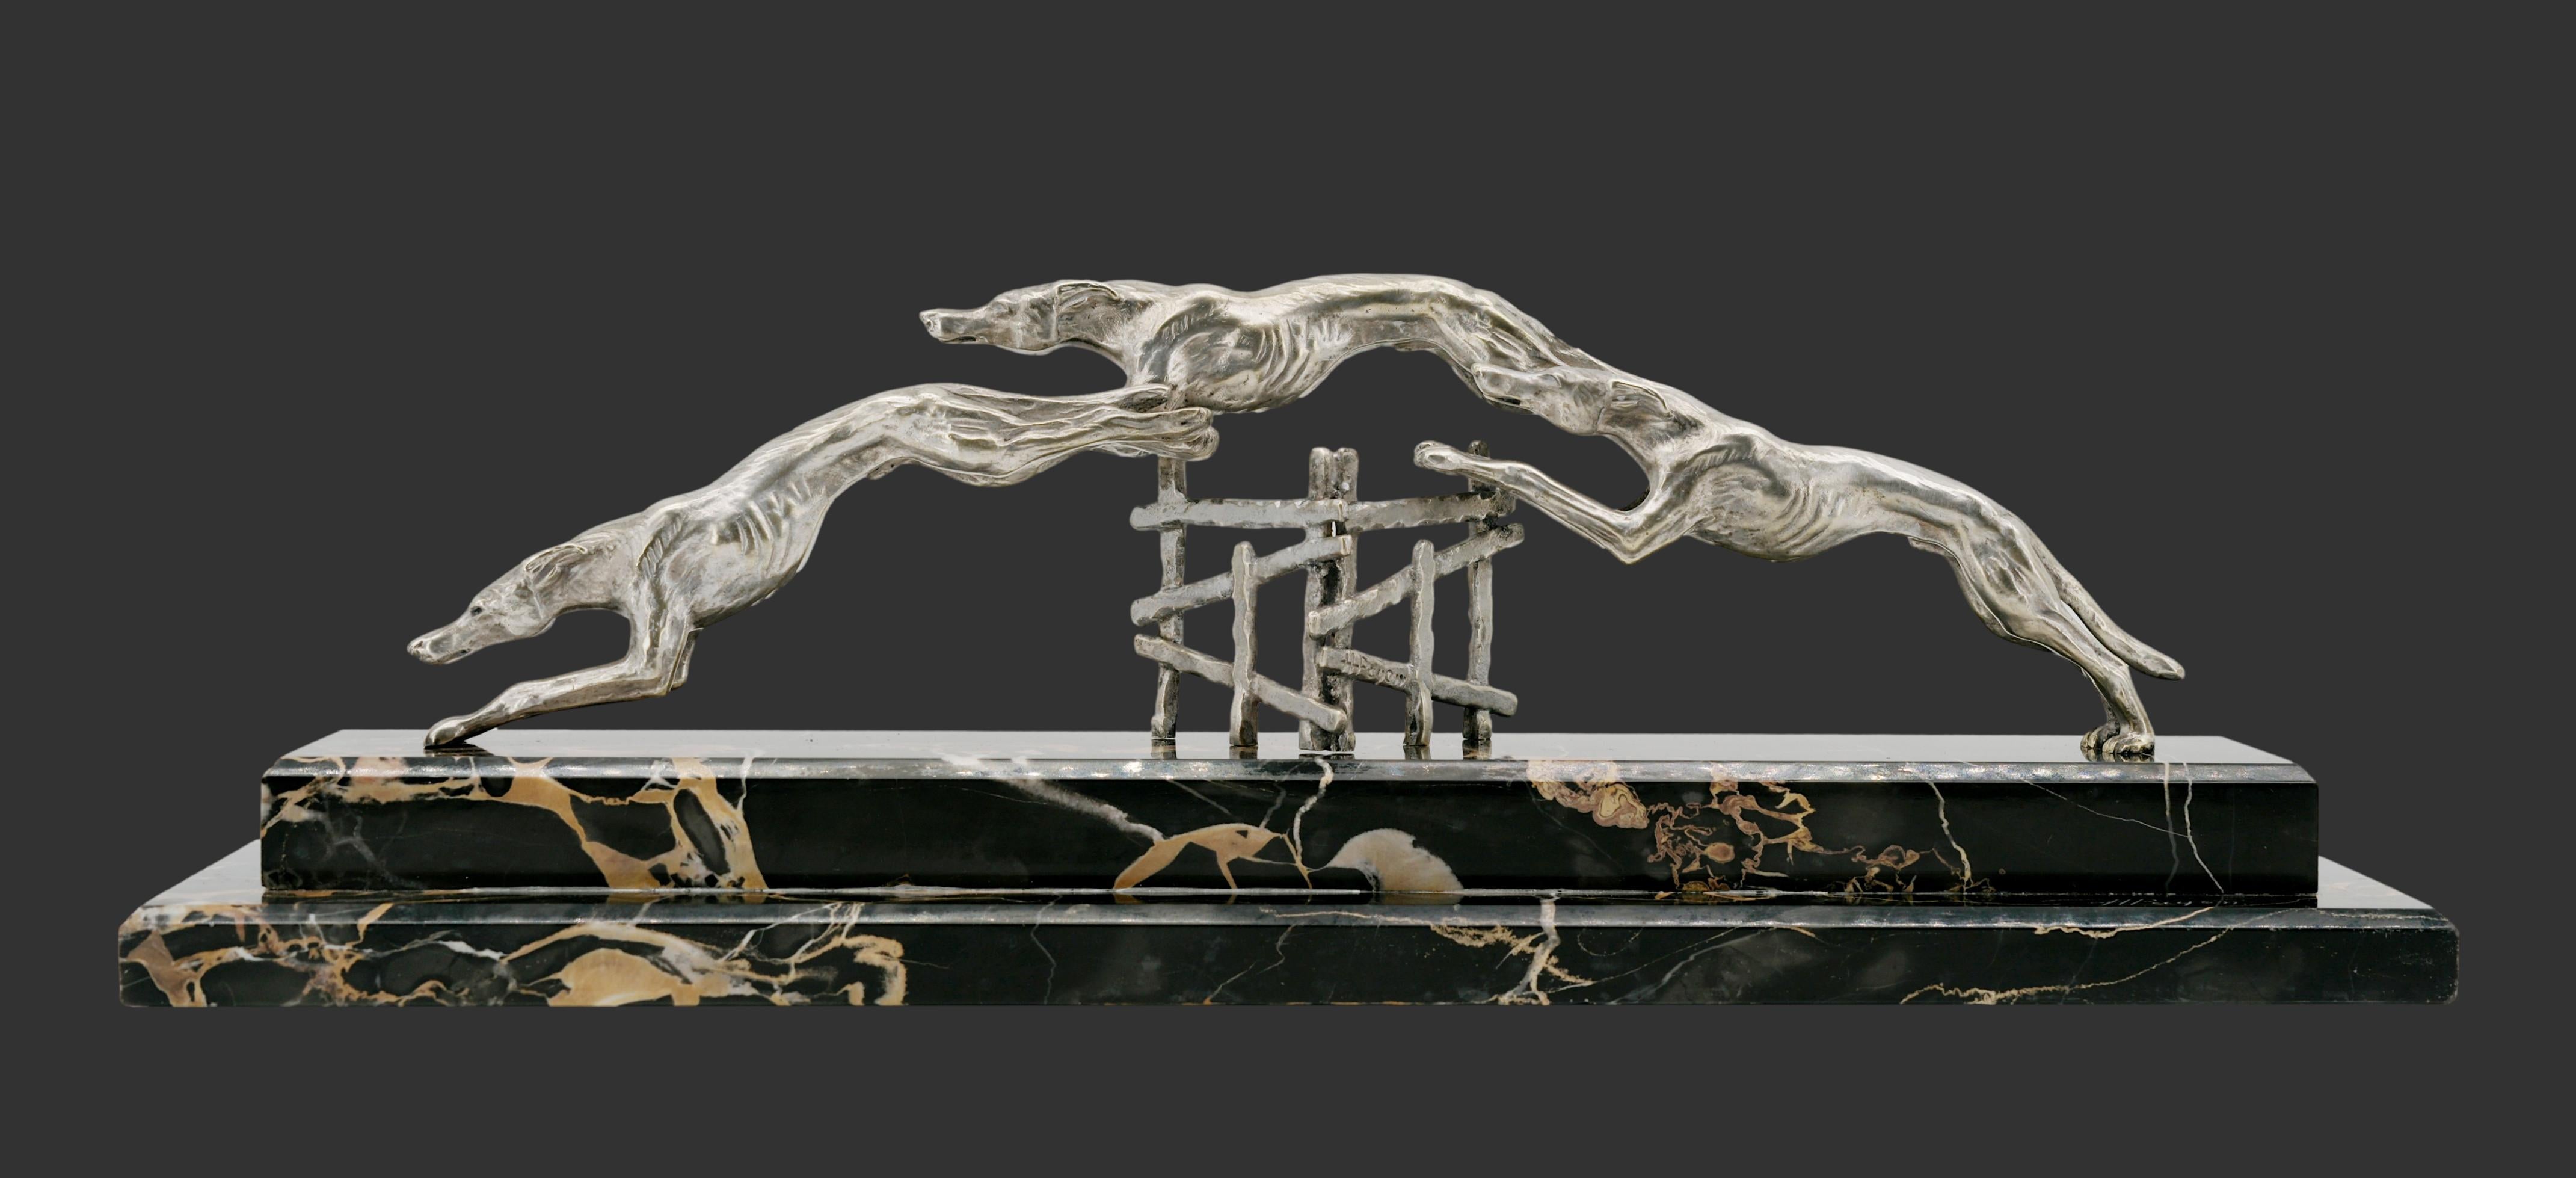 French Art Deco sculpture by Henri PAYEN (1894-1933), France, ca.1925. Greyhound race. Silverplate bronze and marble. Width : 19.8